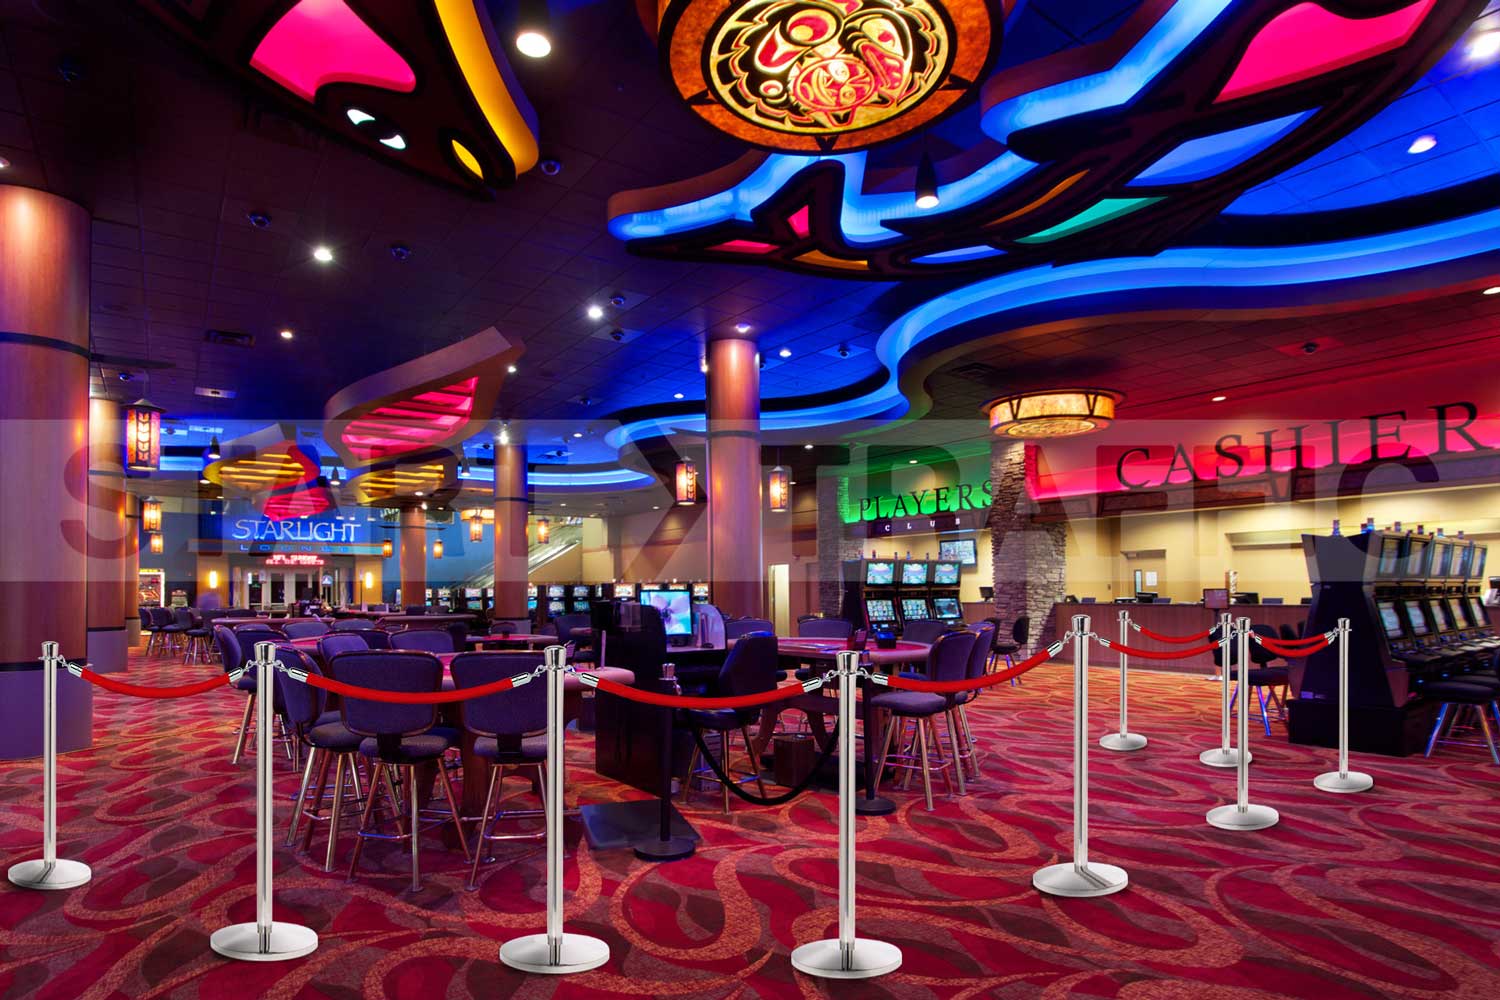 Rope barriers setup in a casino